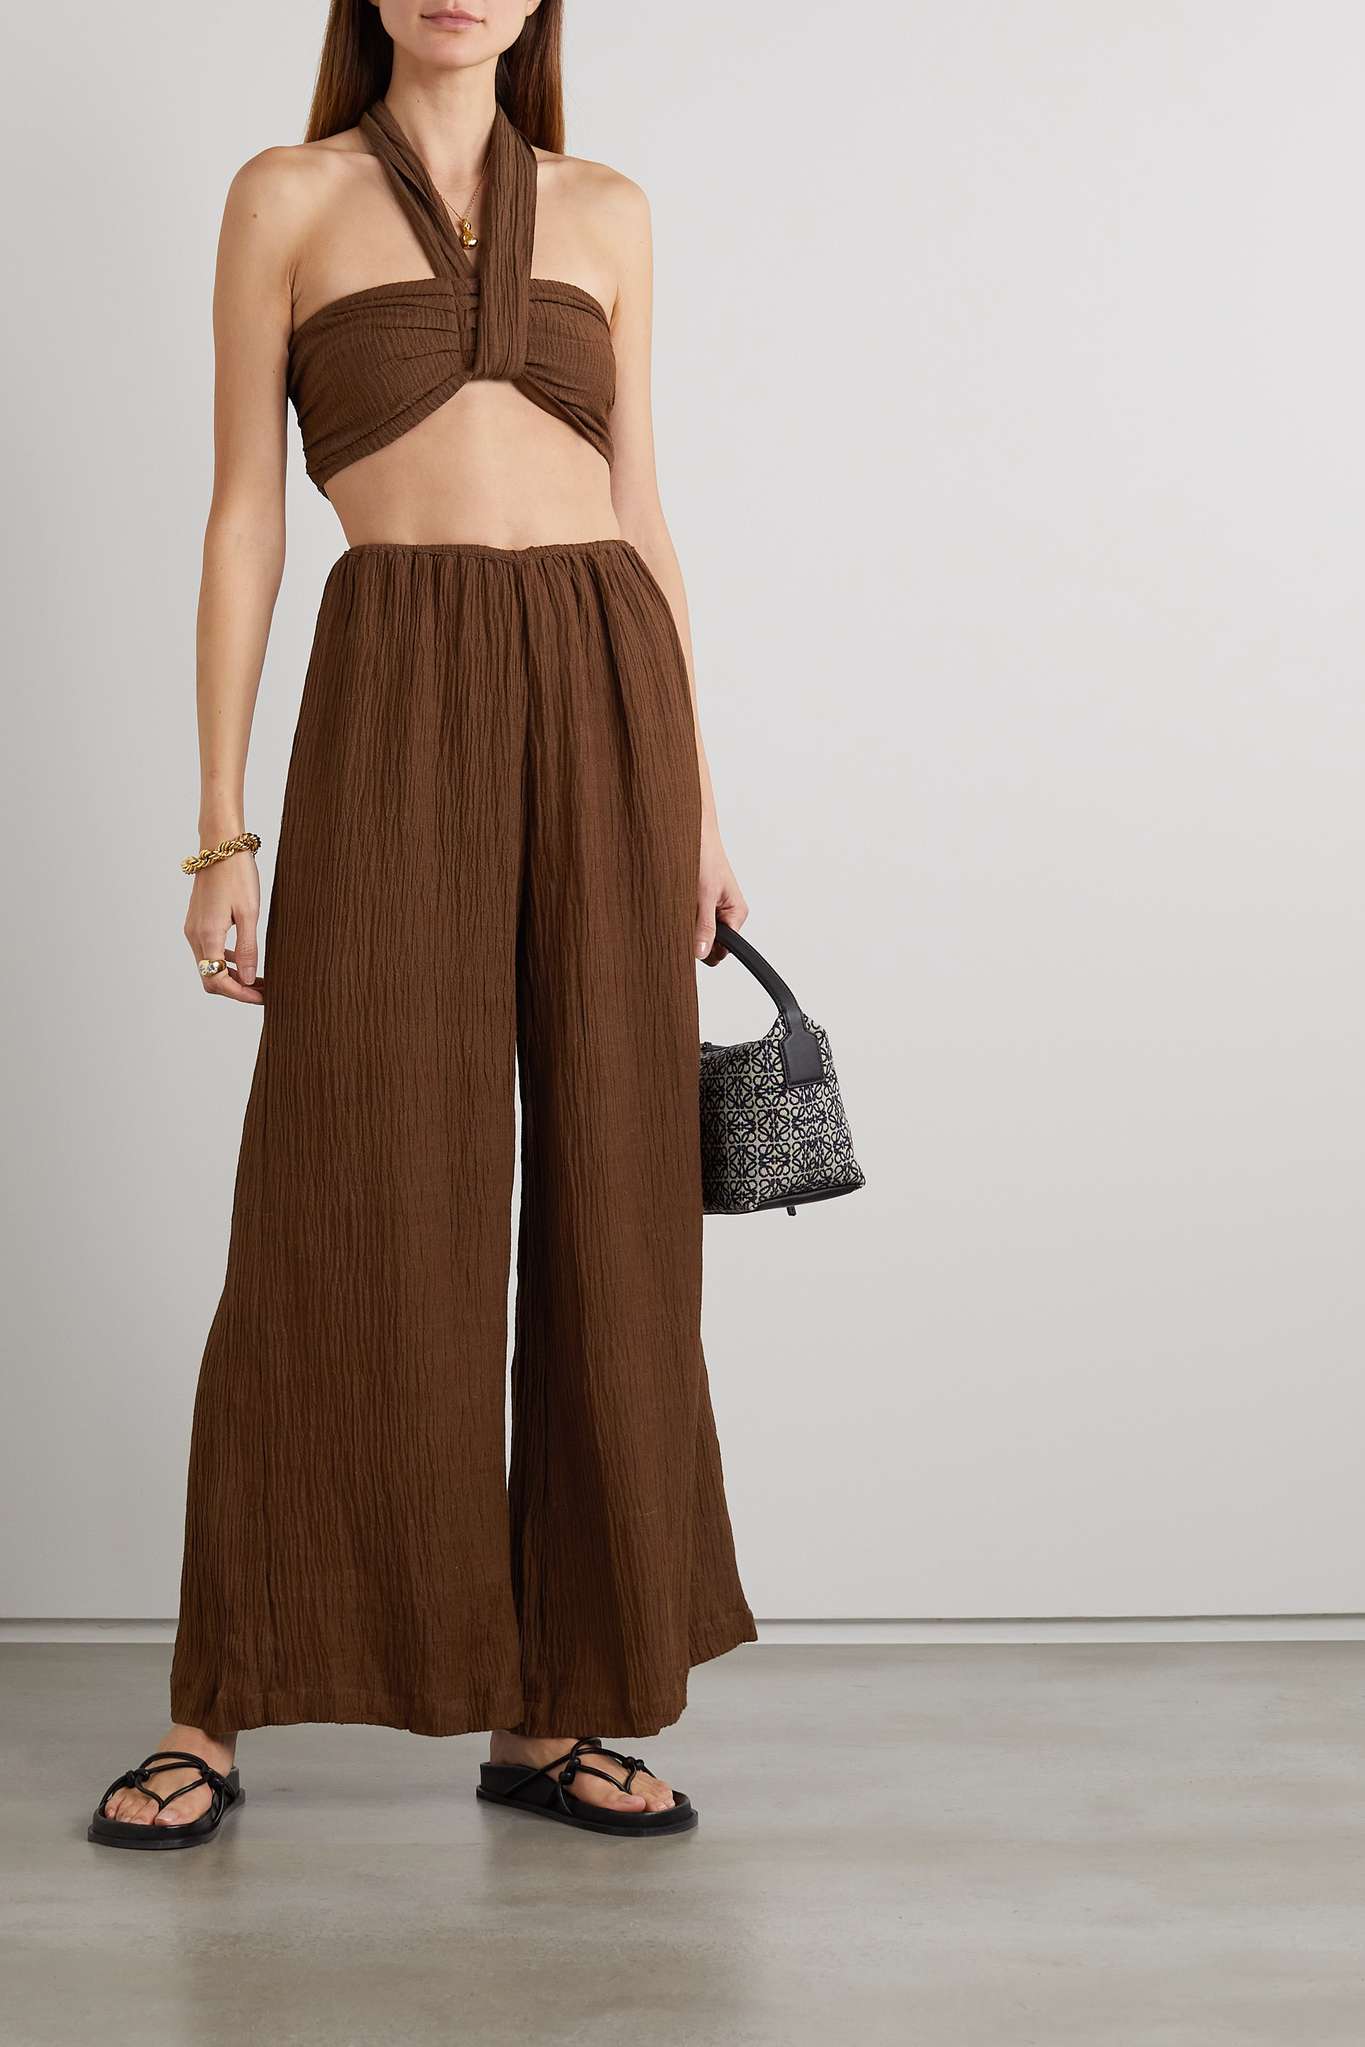 woman weaning a matching cotton gauze brown crop top and pant set with sandals